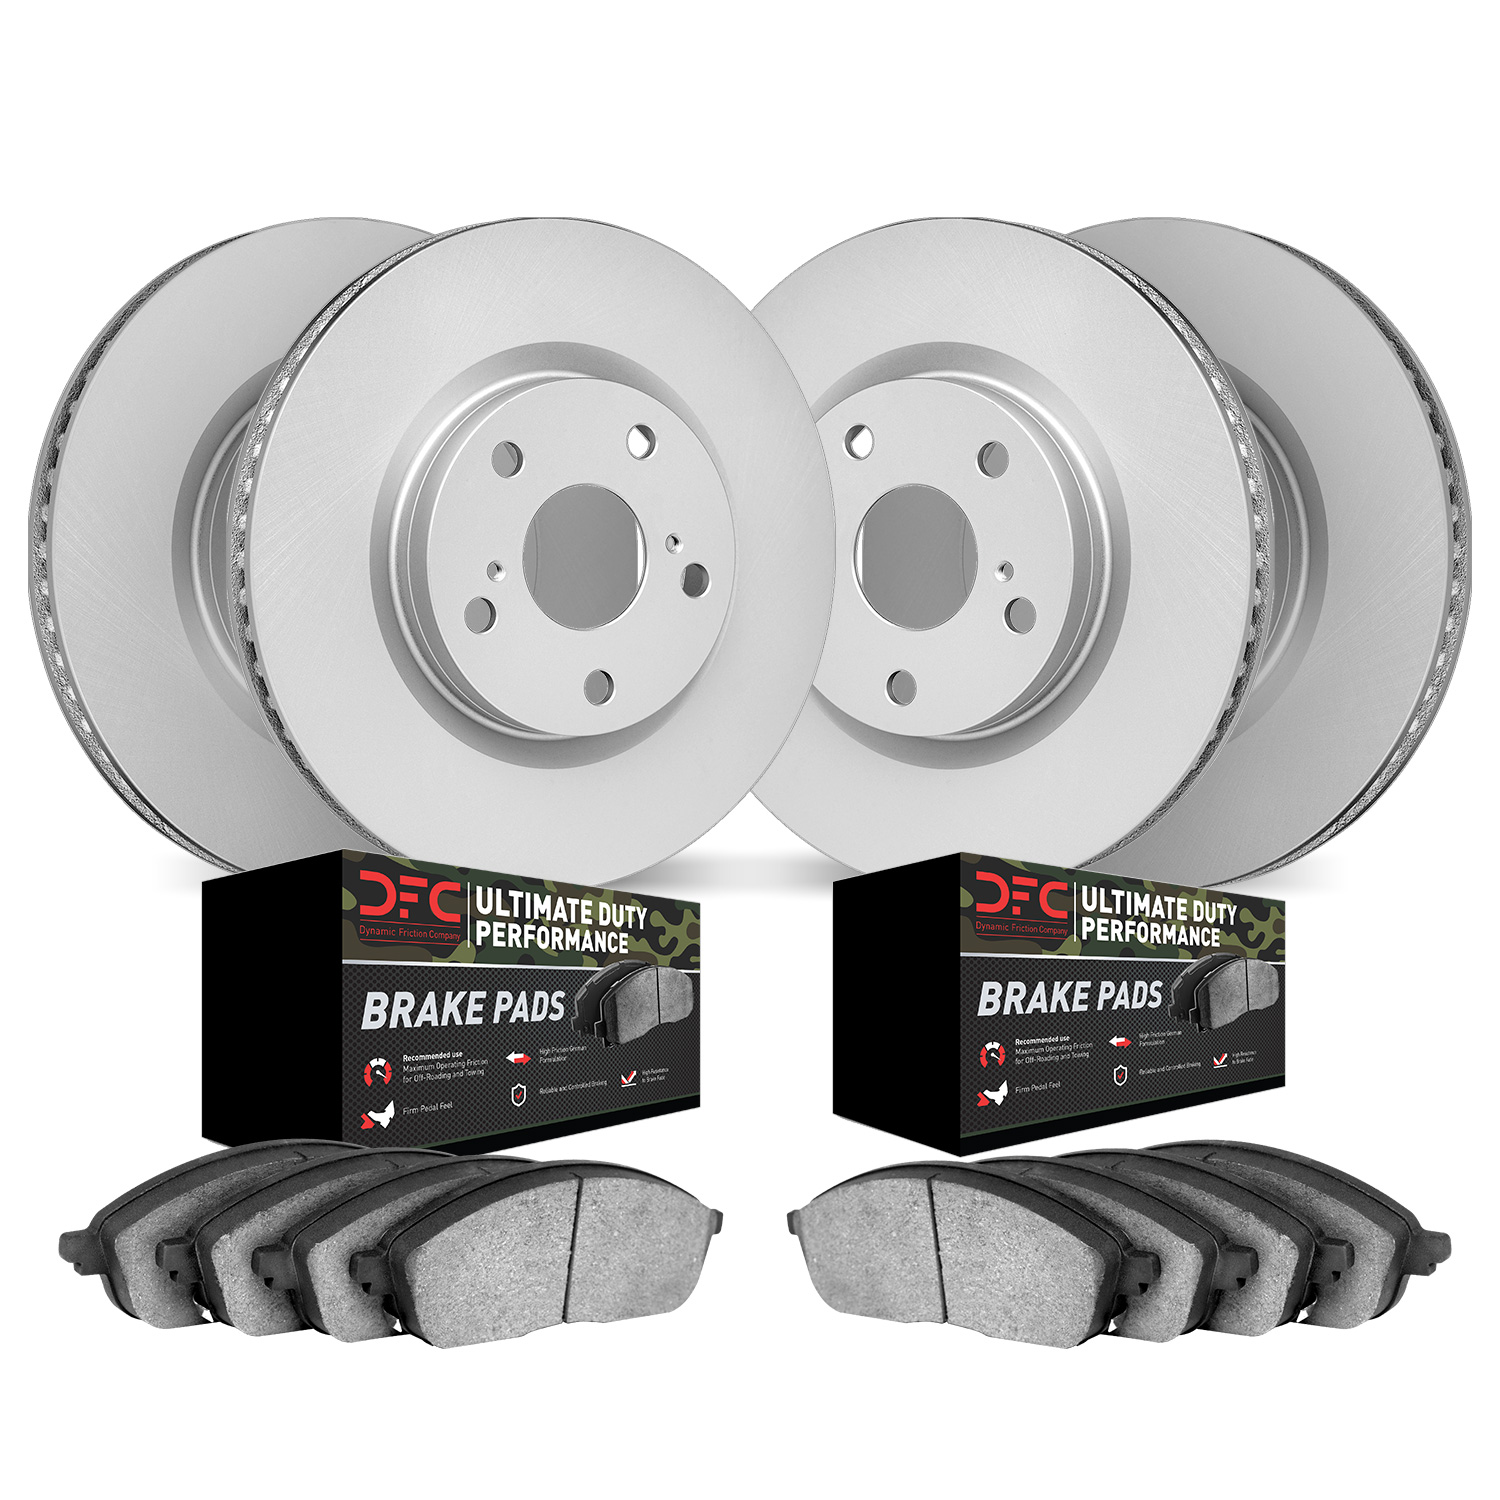 4404-42004 Geospec Brake Rotors with Ultimate-Duty Brake Pads Kit, Fits Select Mopar, Position: Front and Rear